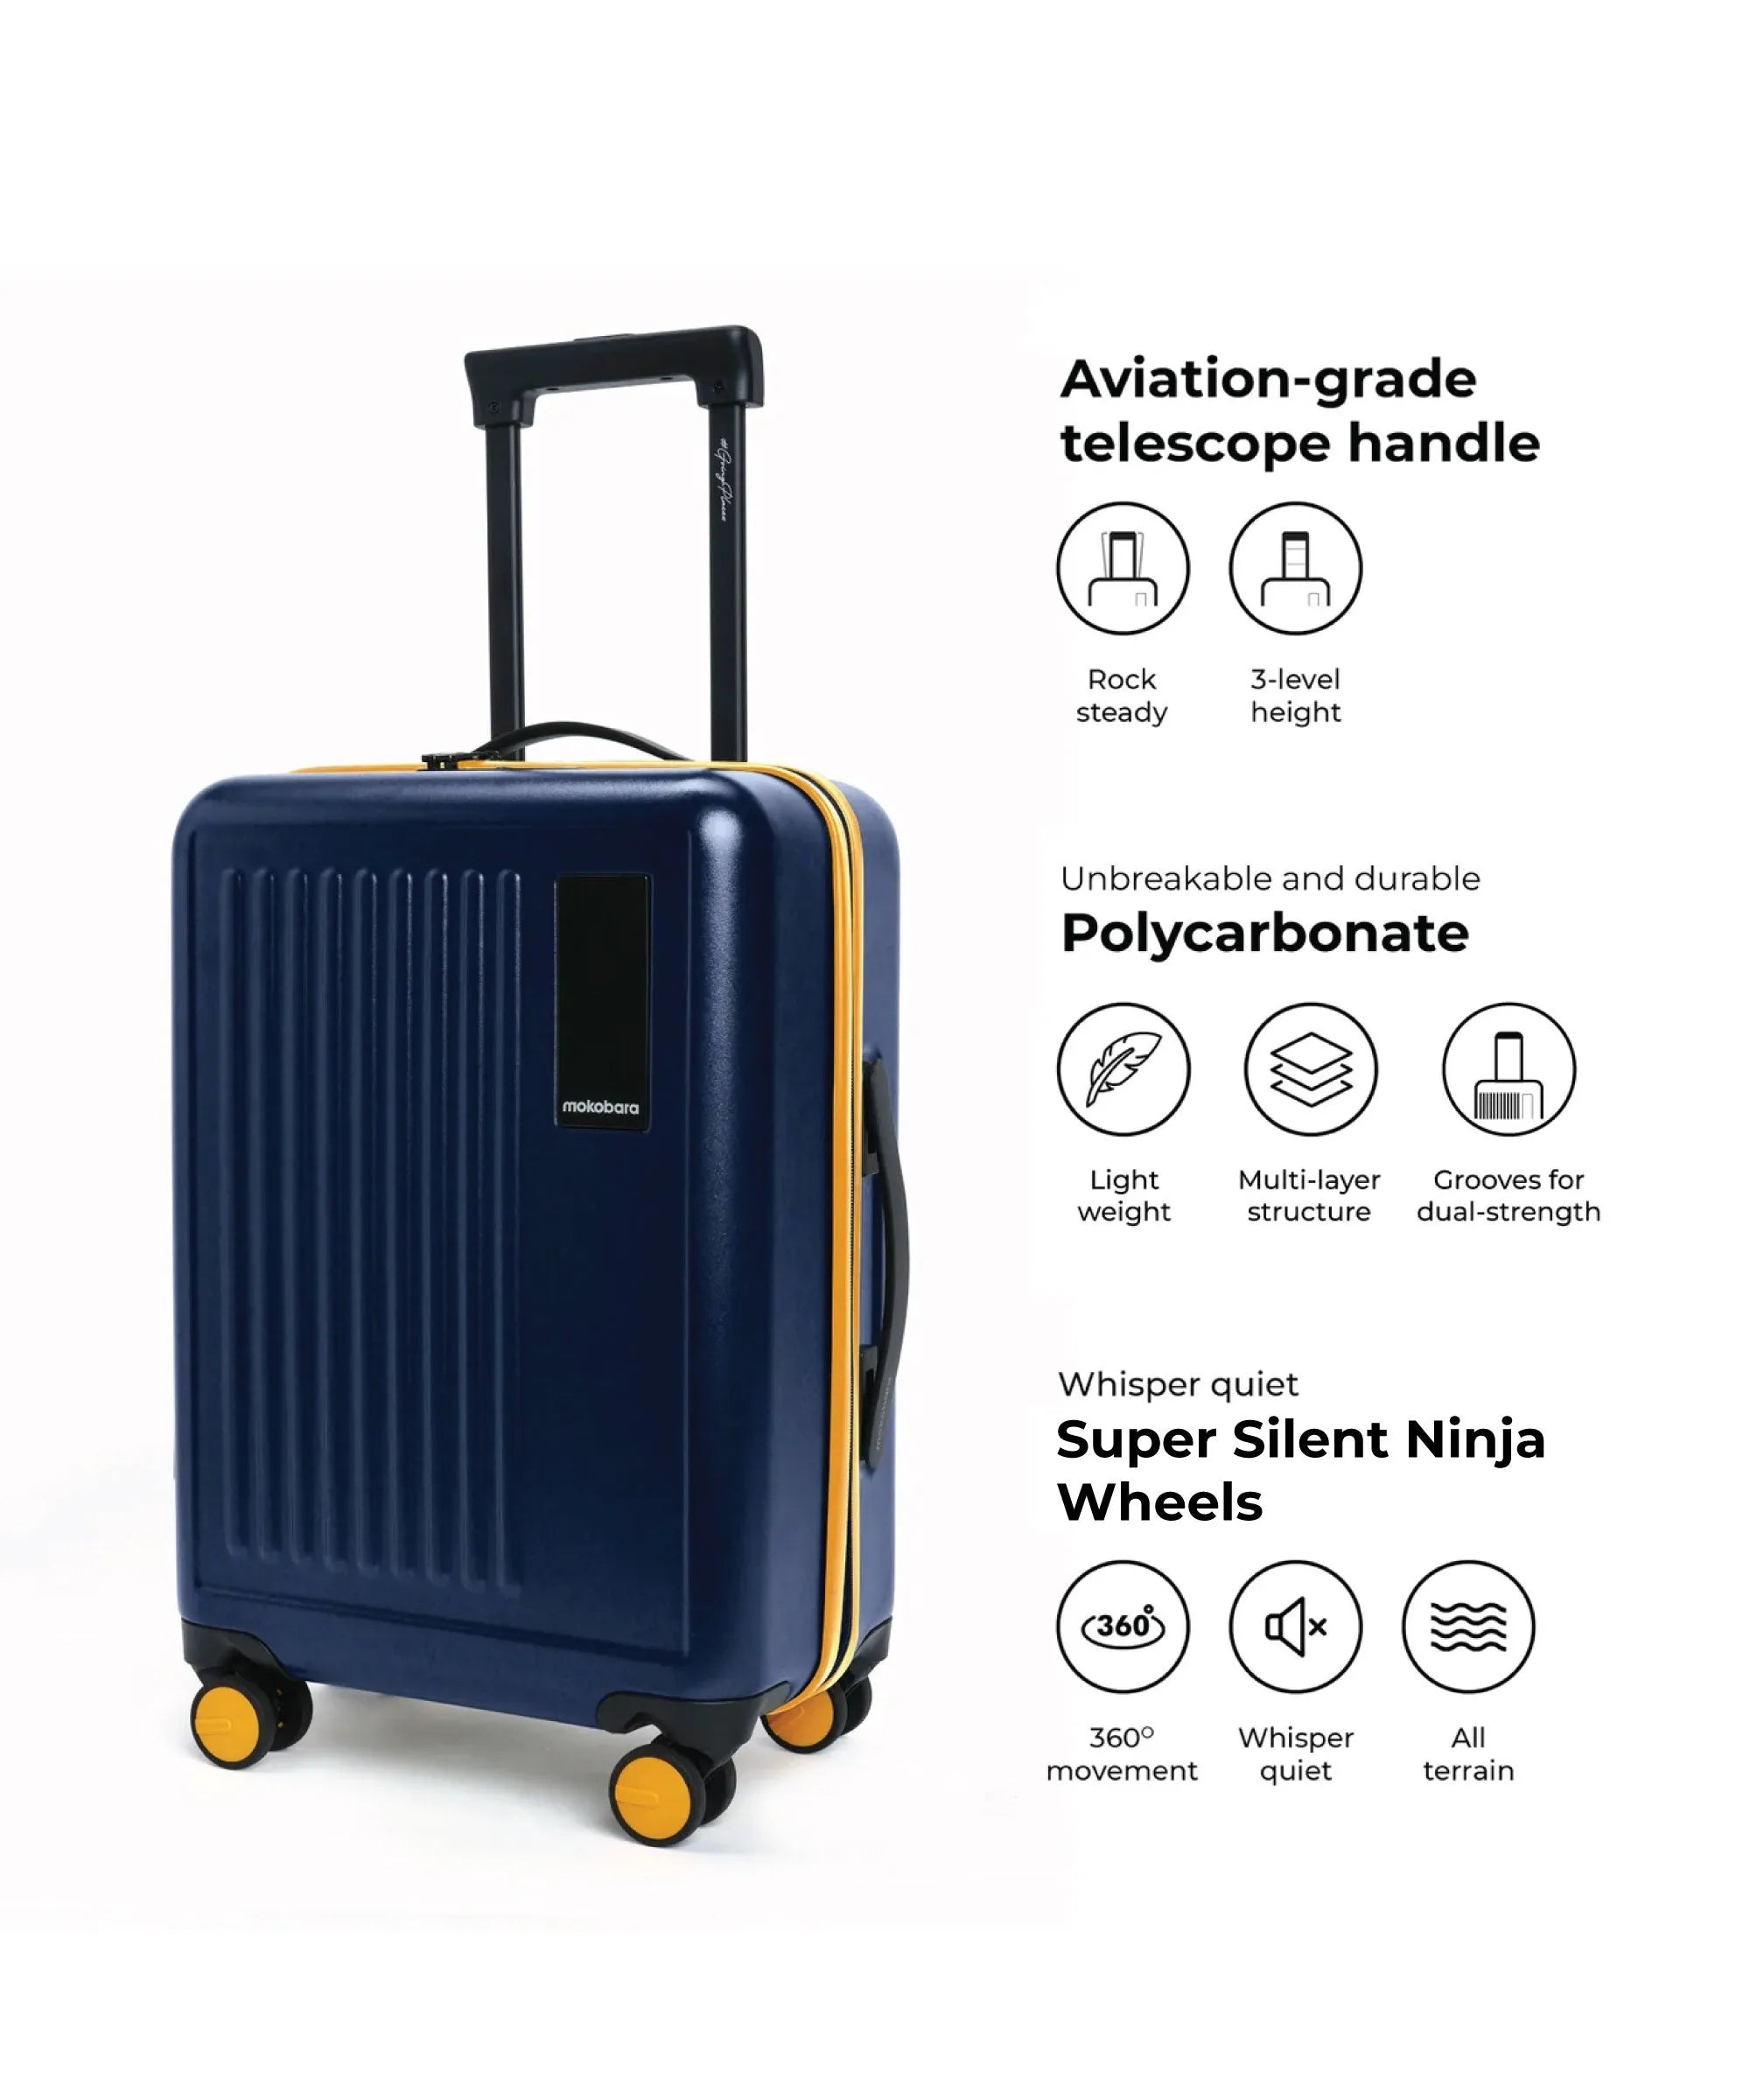 Color_ We meet Again Sunray (Limited Edition) | The Transit Luggage - Cabin